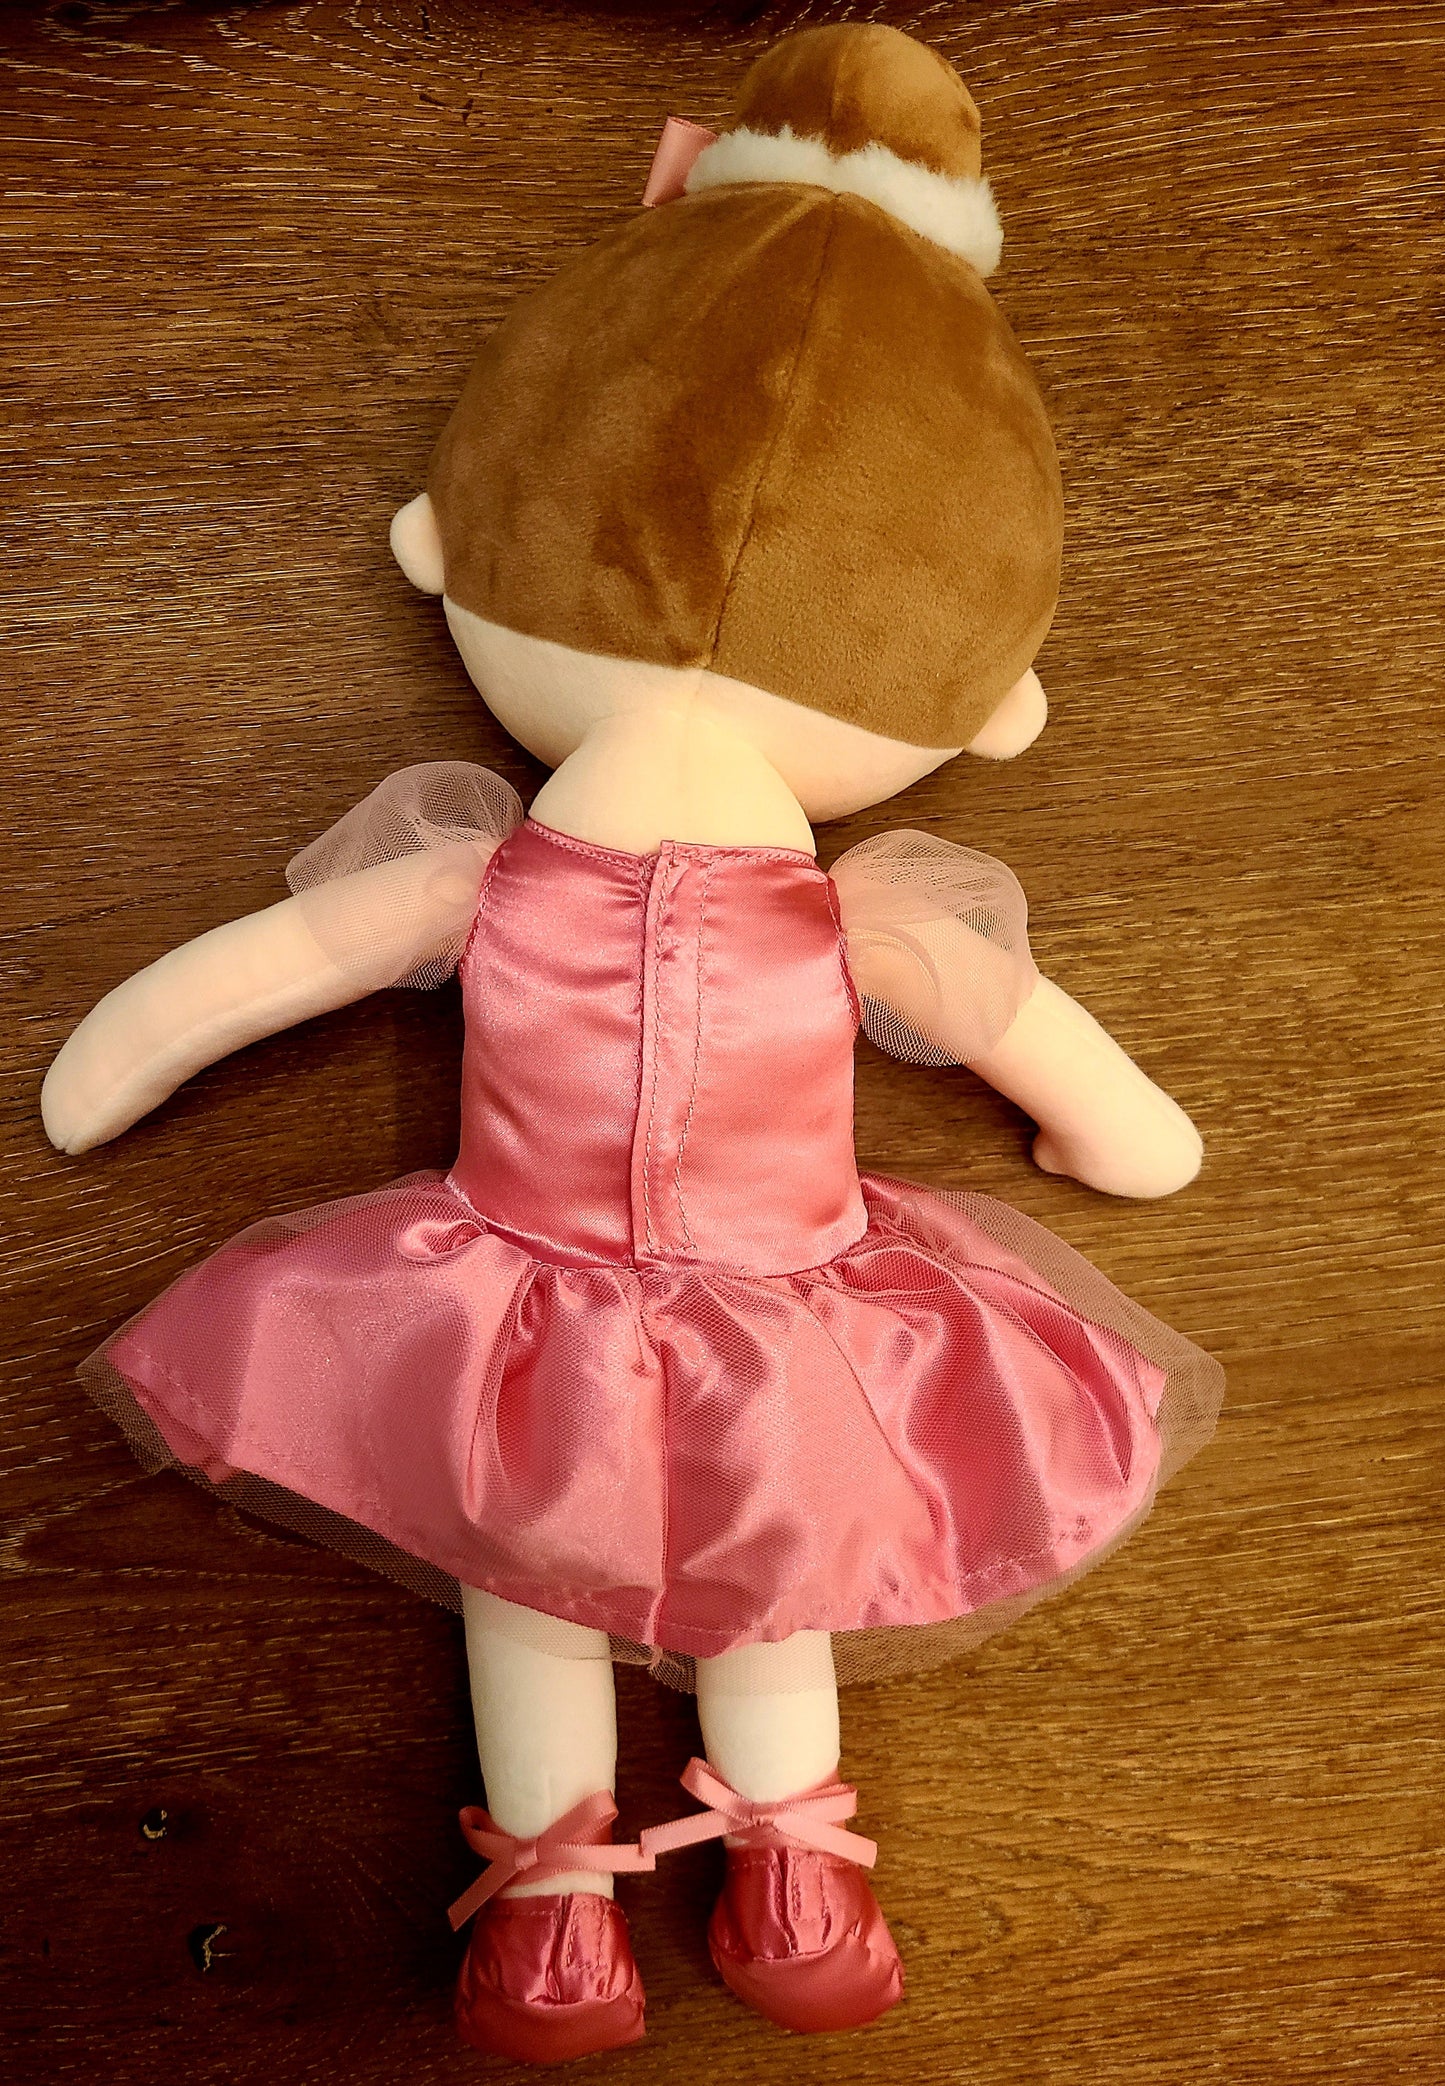 Personalized Soft Rag 15in Ballerina  Dress UP Plush Doll Toy/Handmade Baby Gift Toy